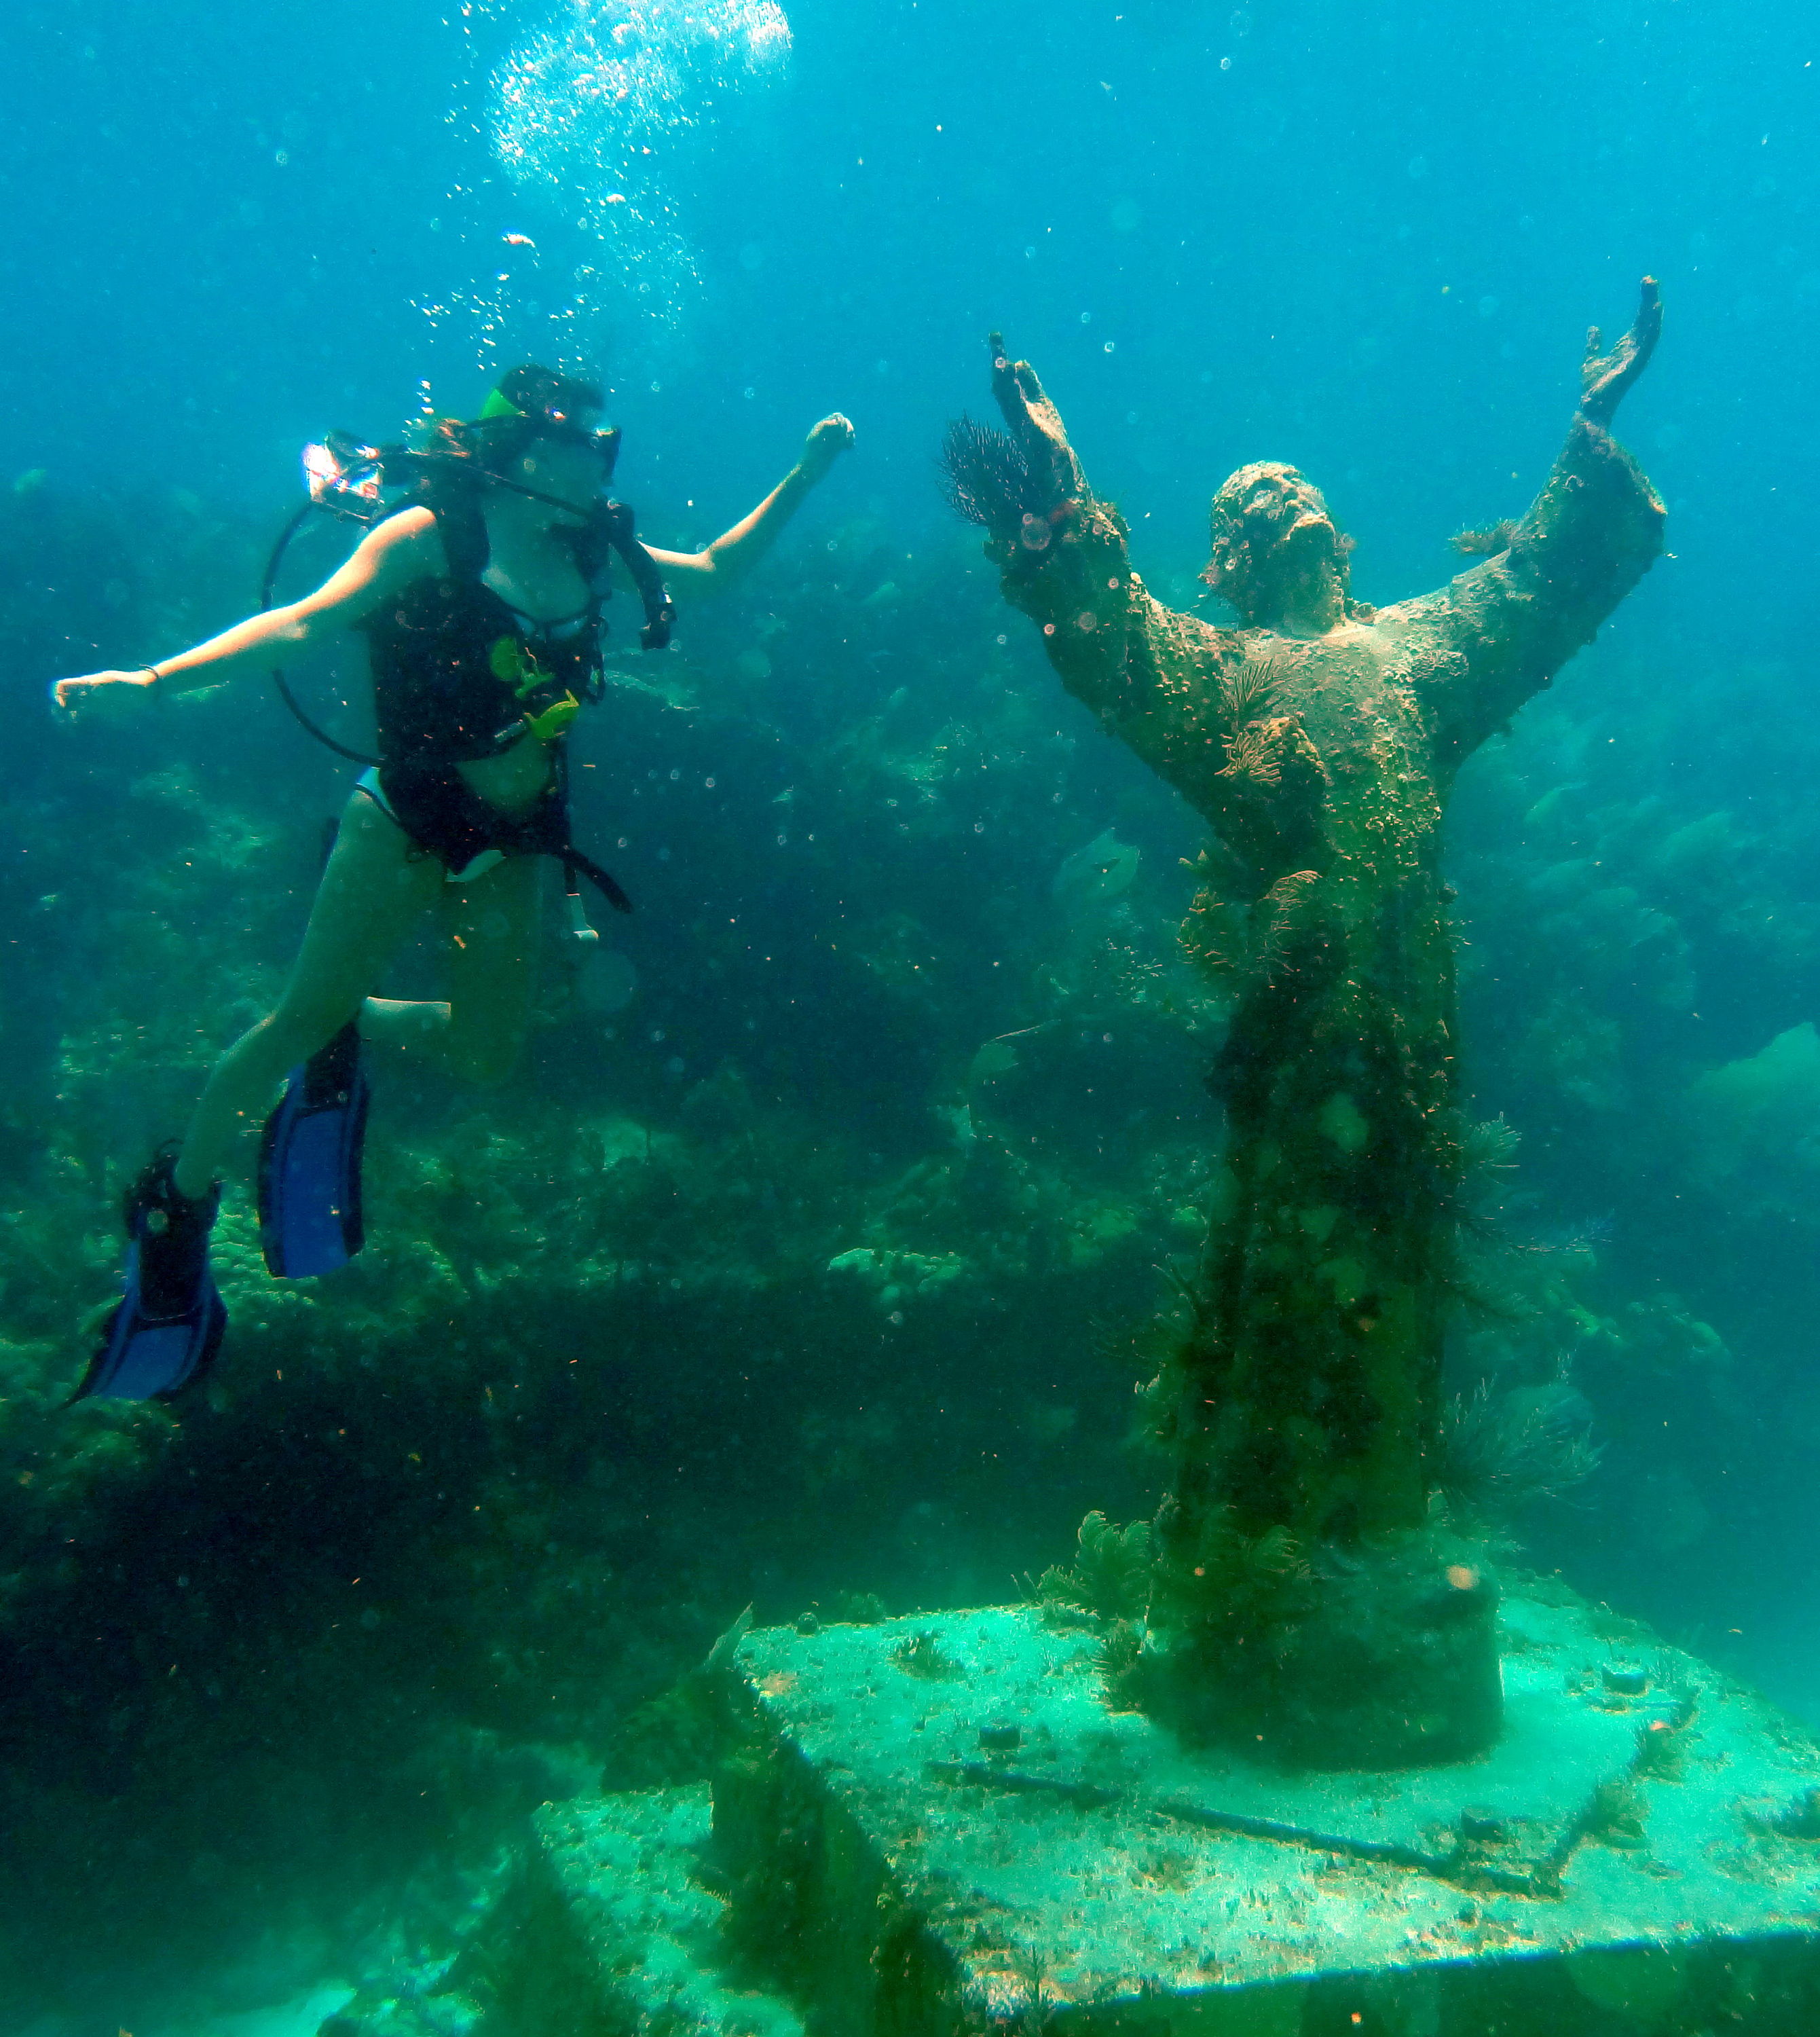 Granddaughter Madison & Christ of the Abyss Key Largo 15